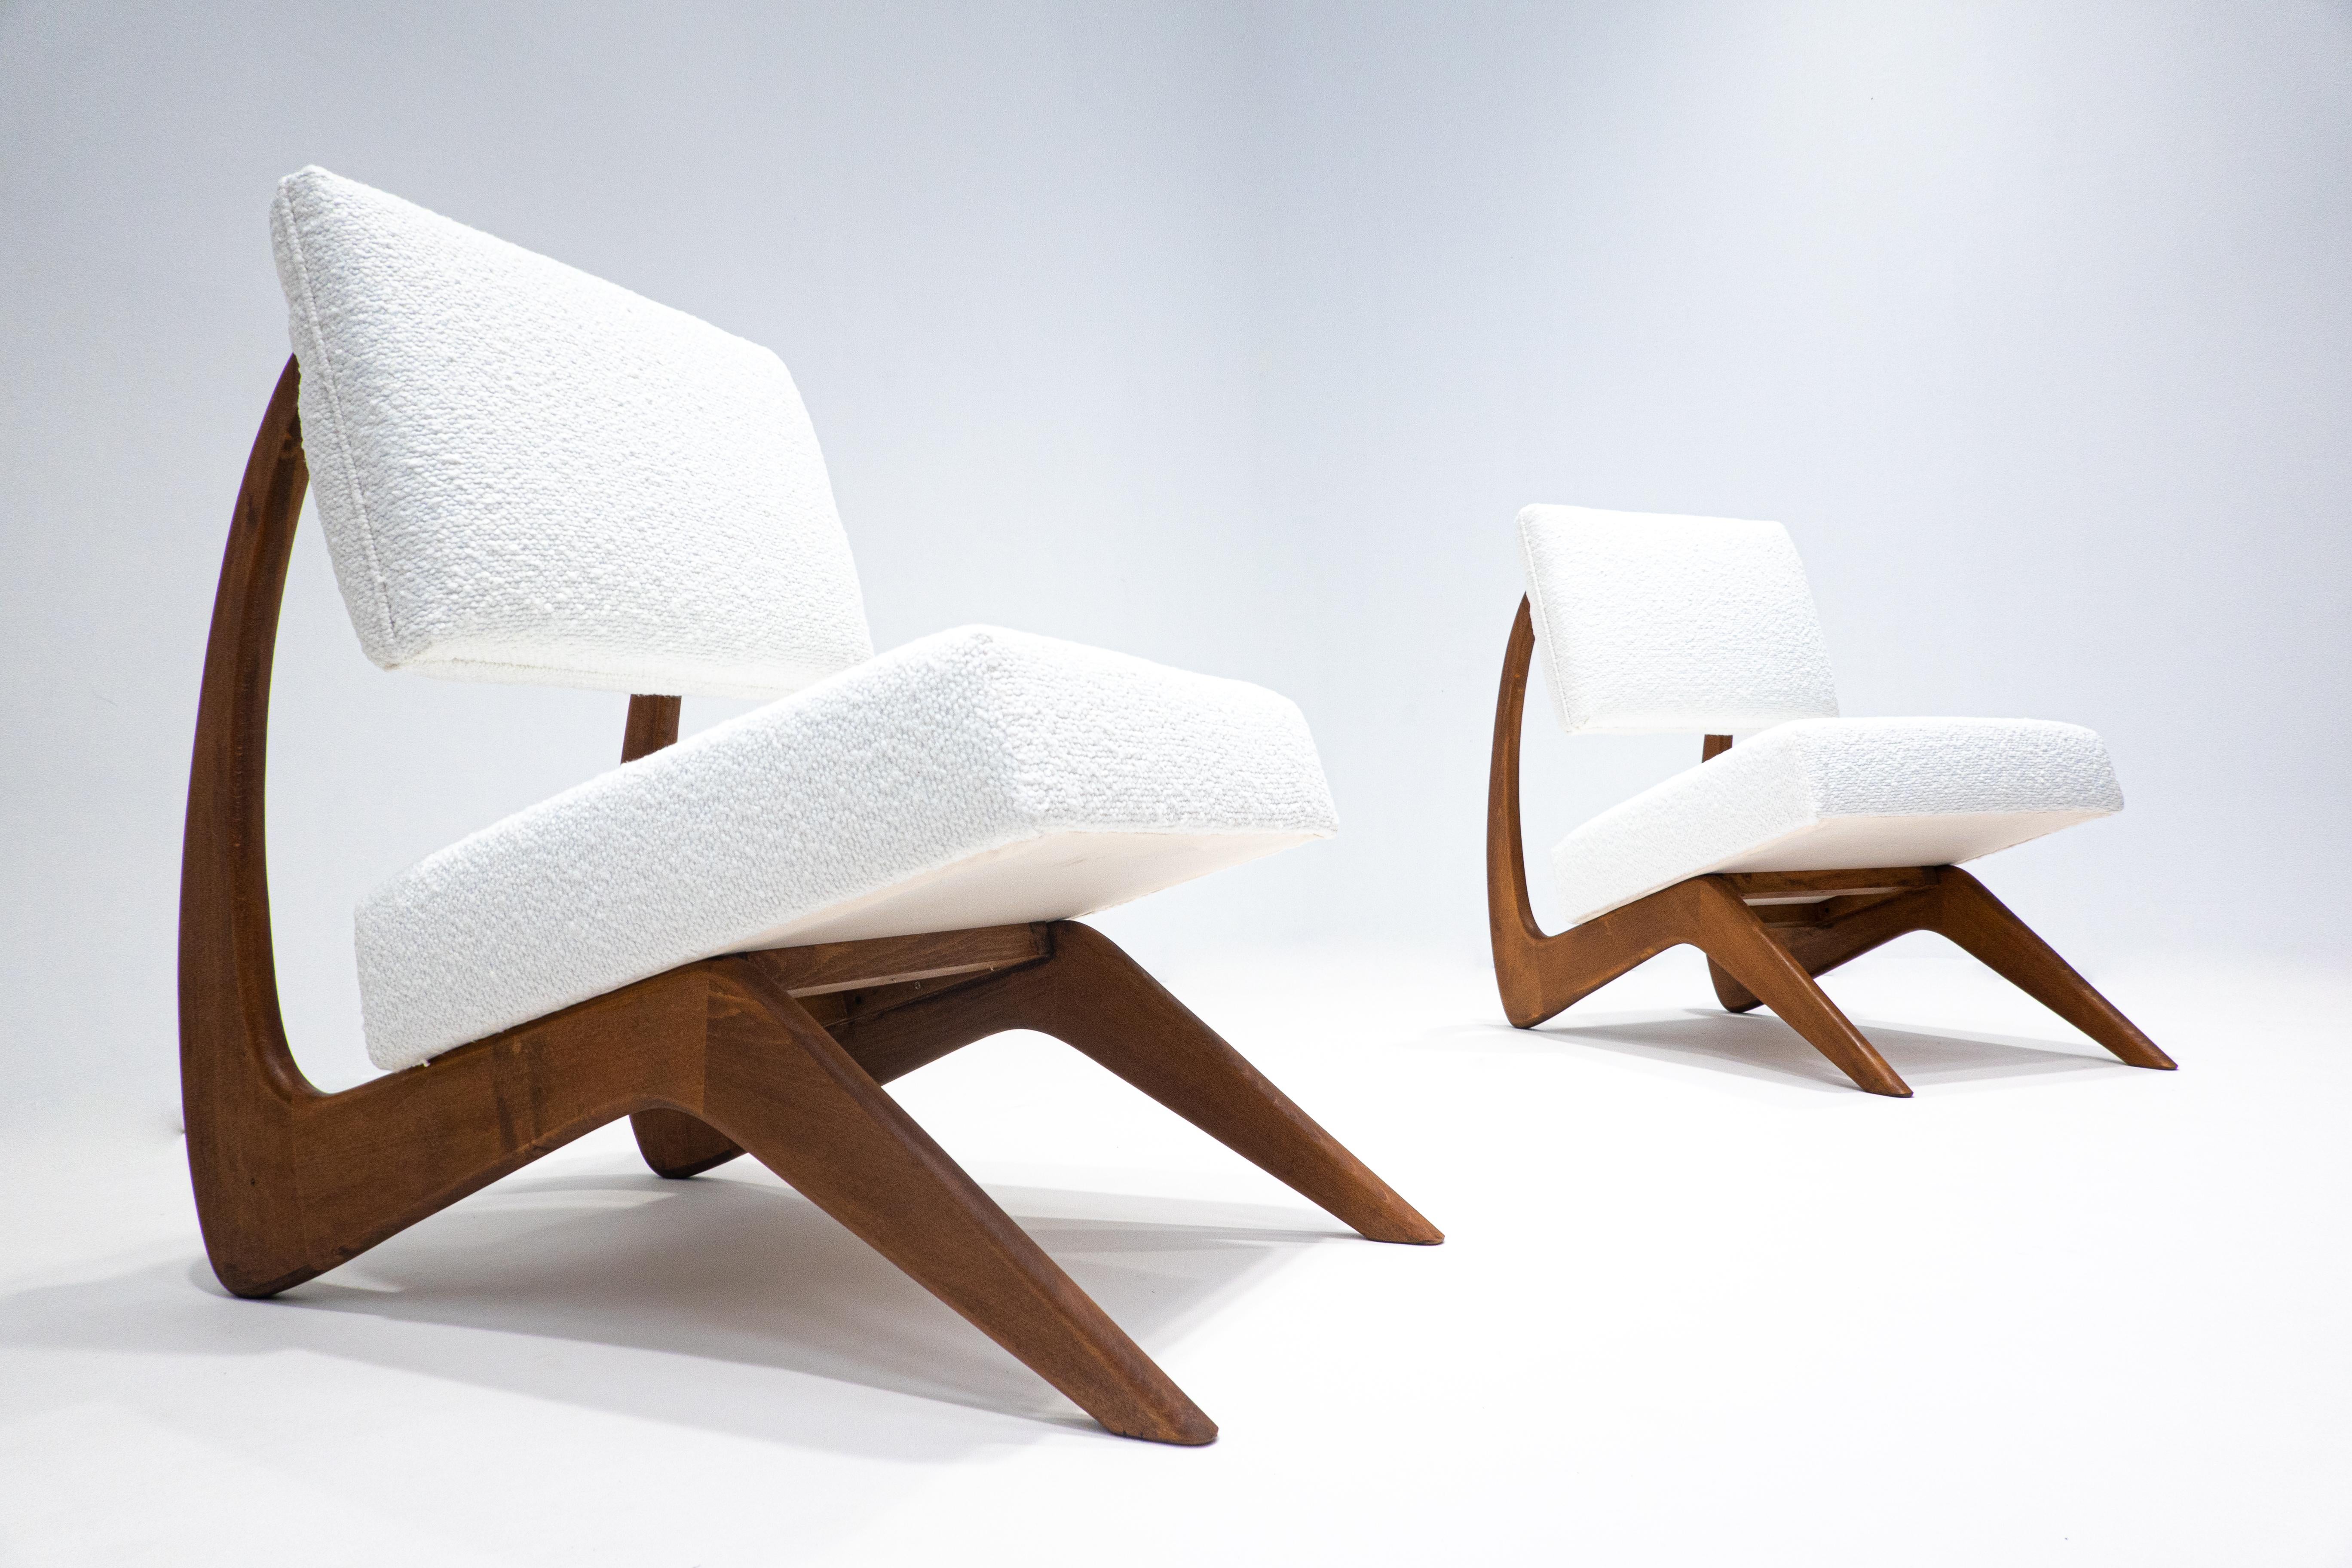 Pair of contemporary chairs, white Bouclette and wood, Italy.